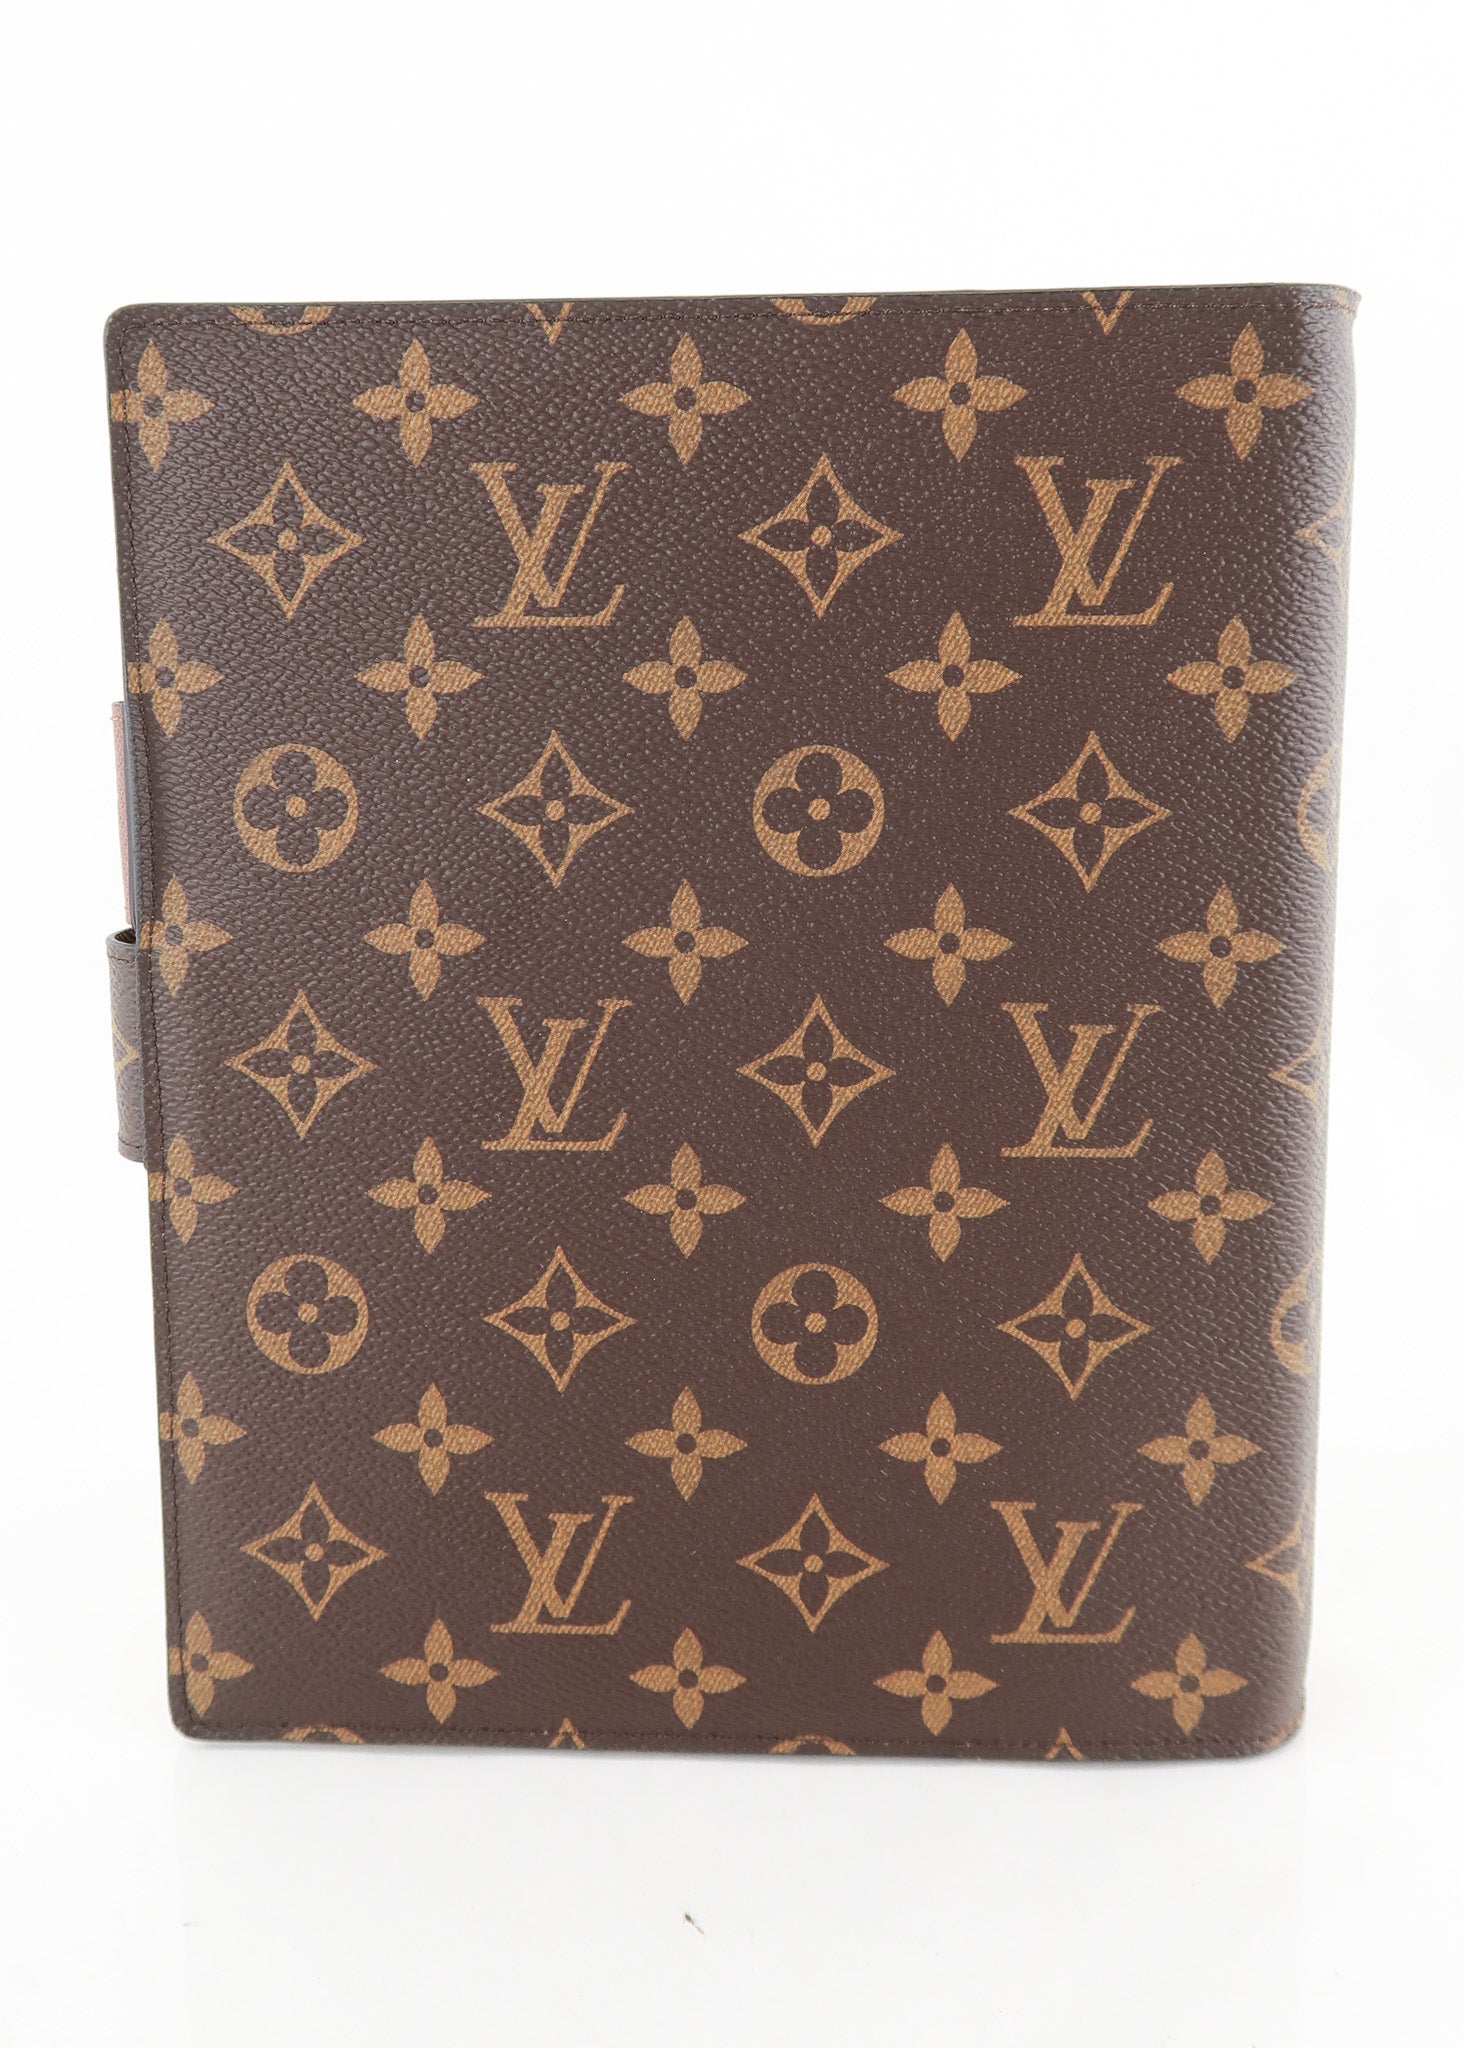 LOUIS VUITTON -VINTAGE AUTHENTIC MONOGRAM NOTE PAD WITH GOLD PENCIL-BOX &  SLEEPER BAG